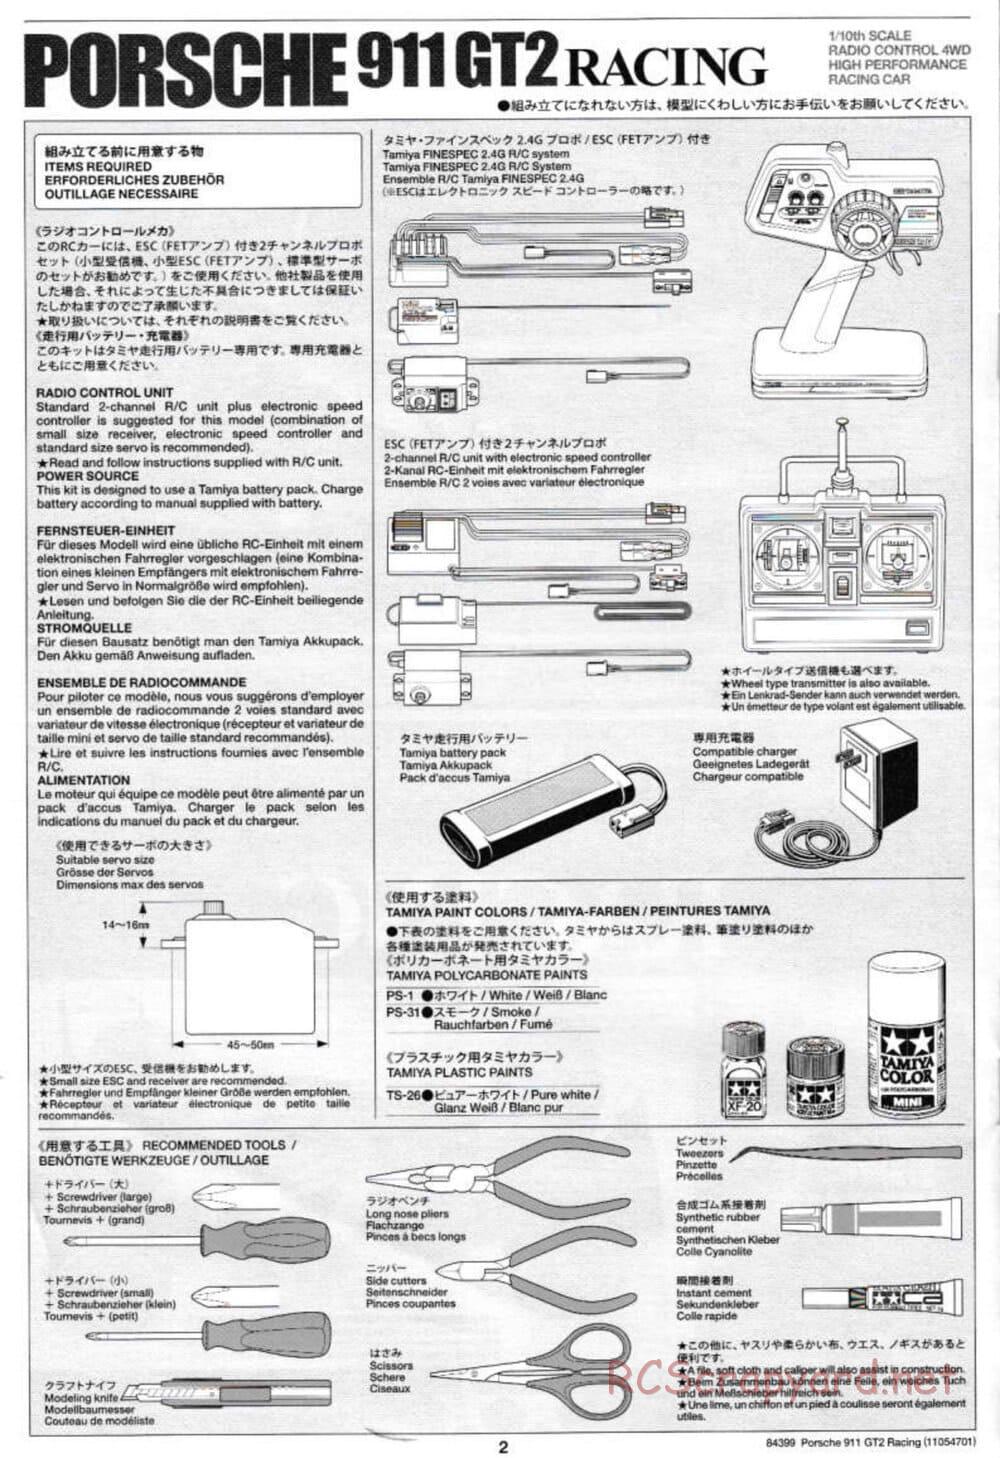 Tamiya - Porsche 911 GT2 Racing - TA02SW Chassis - Manual - Page 2